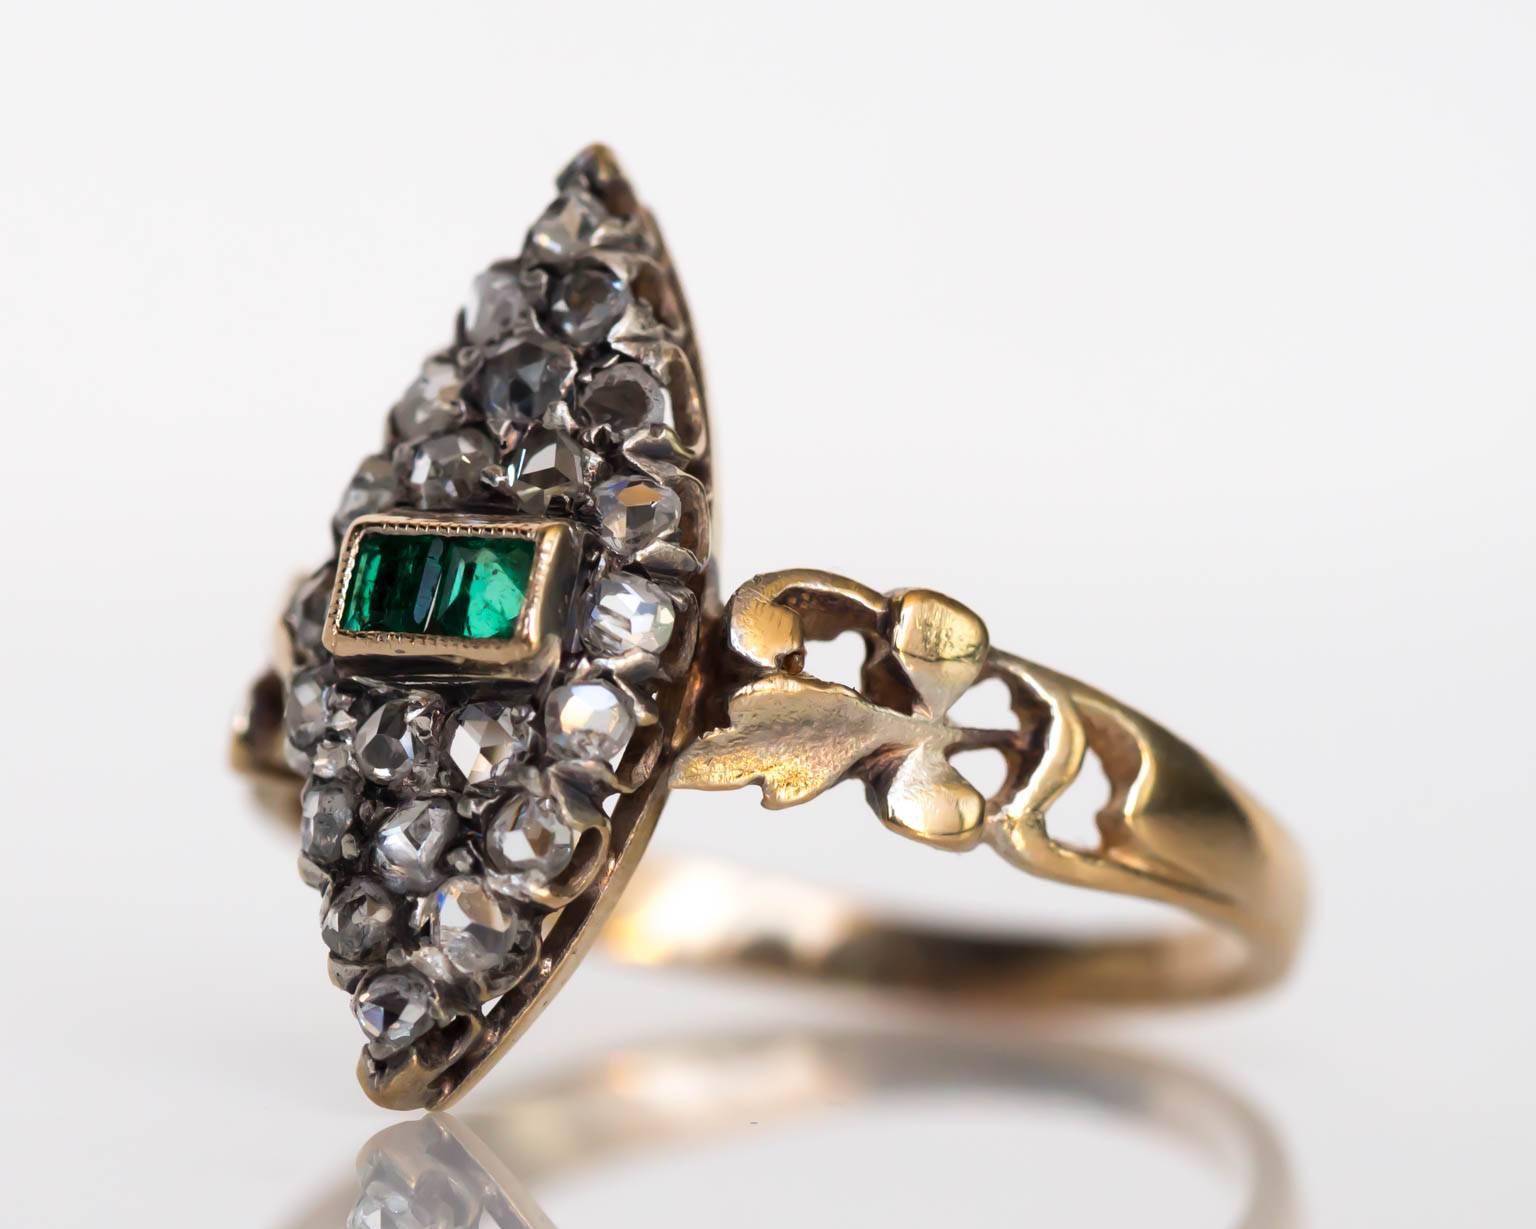 Item Details: 
Ring Size: 8
Metal Type: 18 Karat Yellow Gold
Weight: 3.7 grams

Diamond Details:
Shape: Antique Rose Cut
Carat Weight: .60 carat, total weight
Color: H-I-J
Clarity: SI

Color Stone Details: 
Type: Emerald
Carat Weight: .50